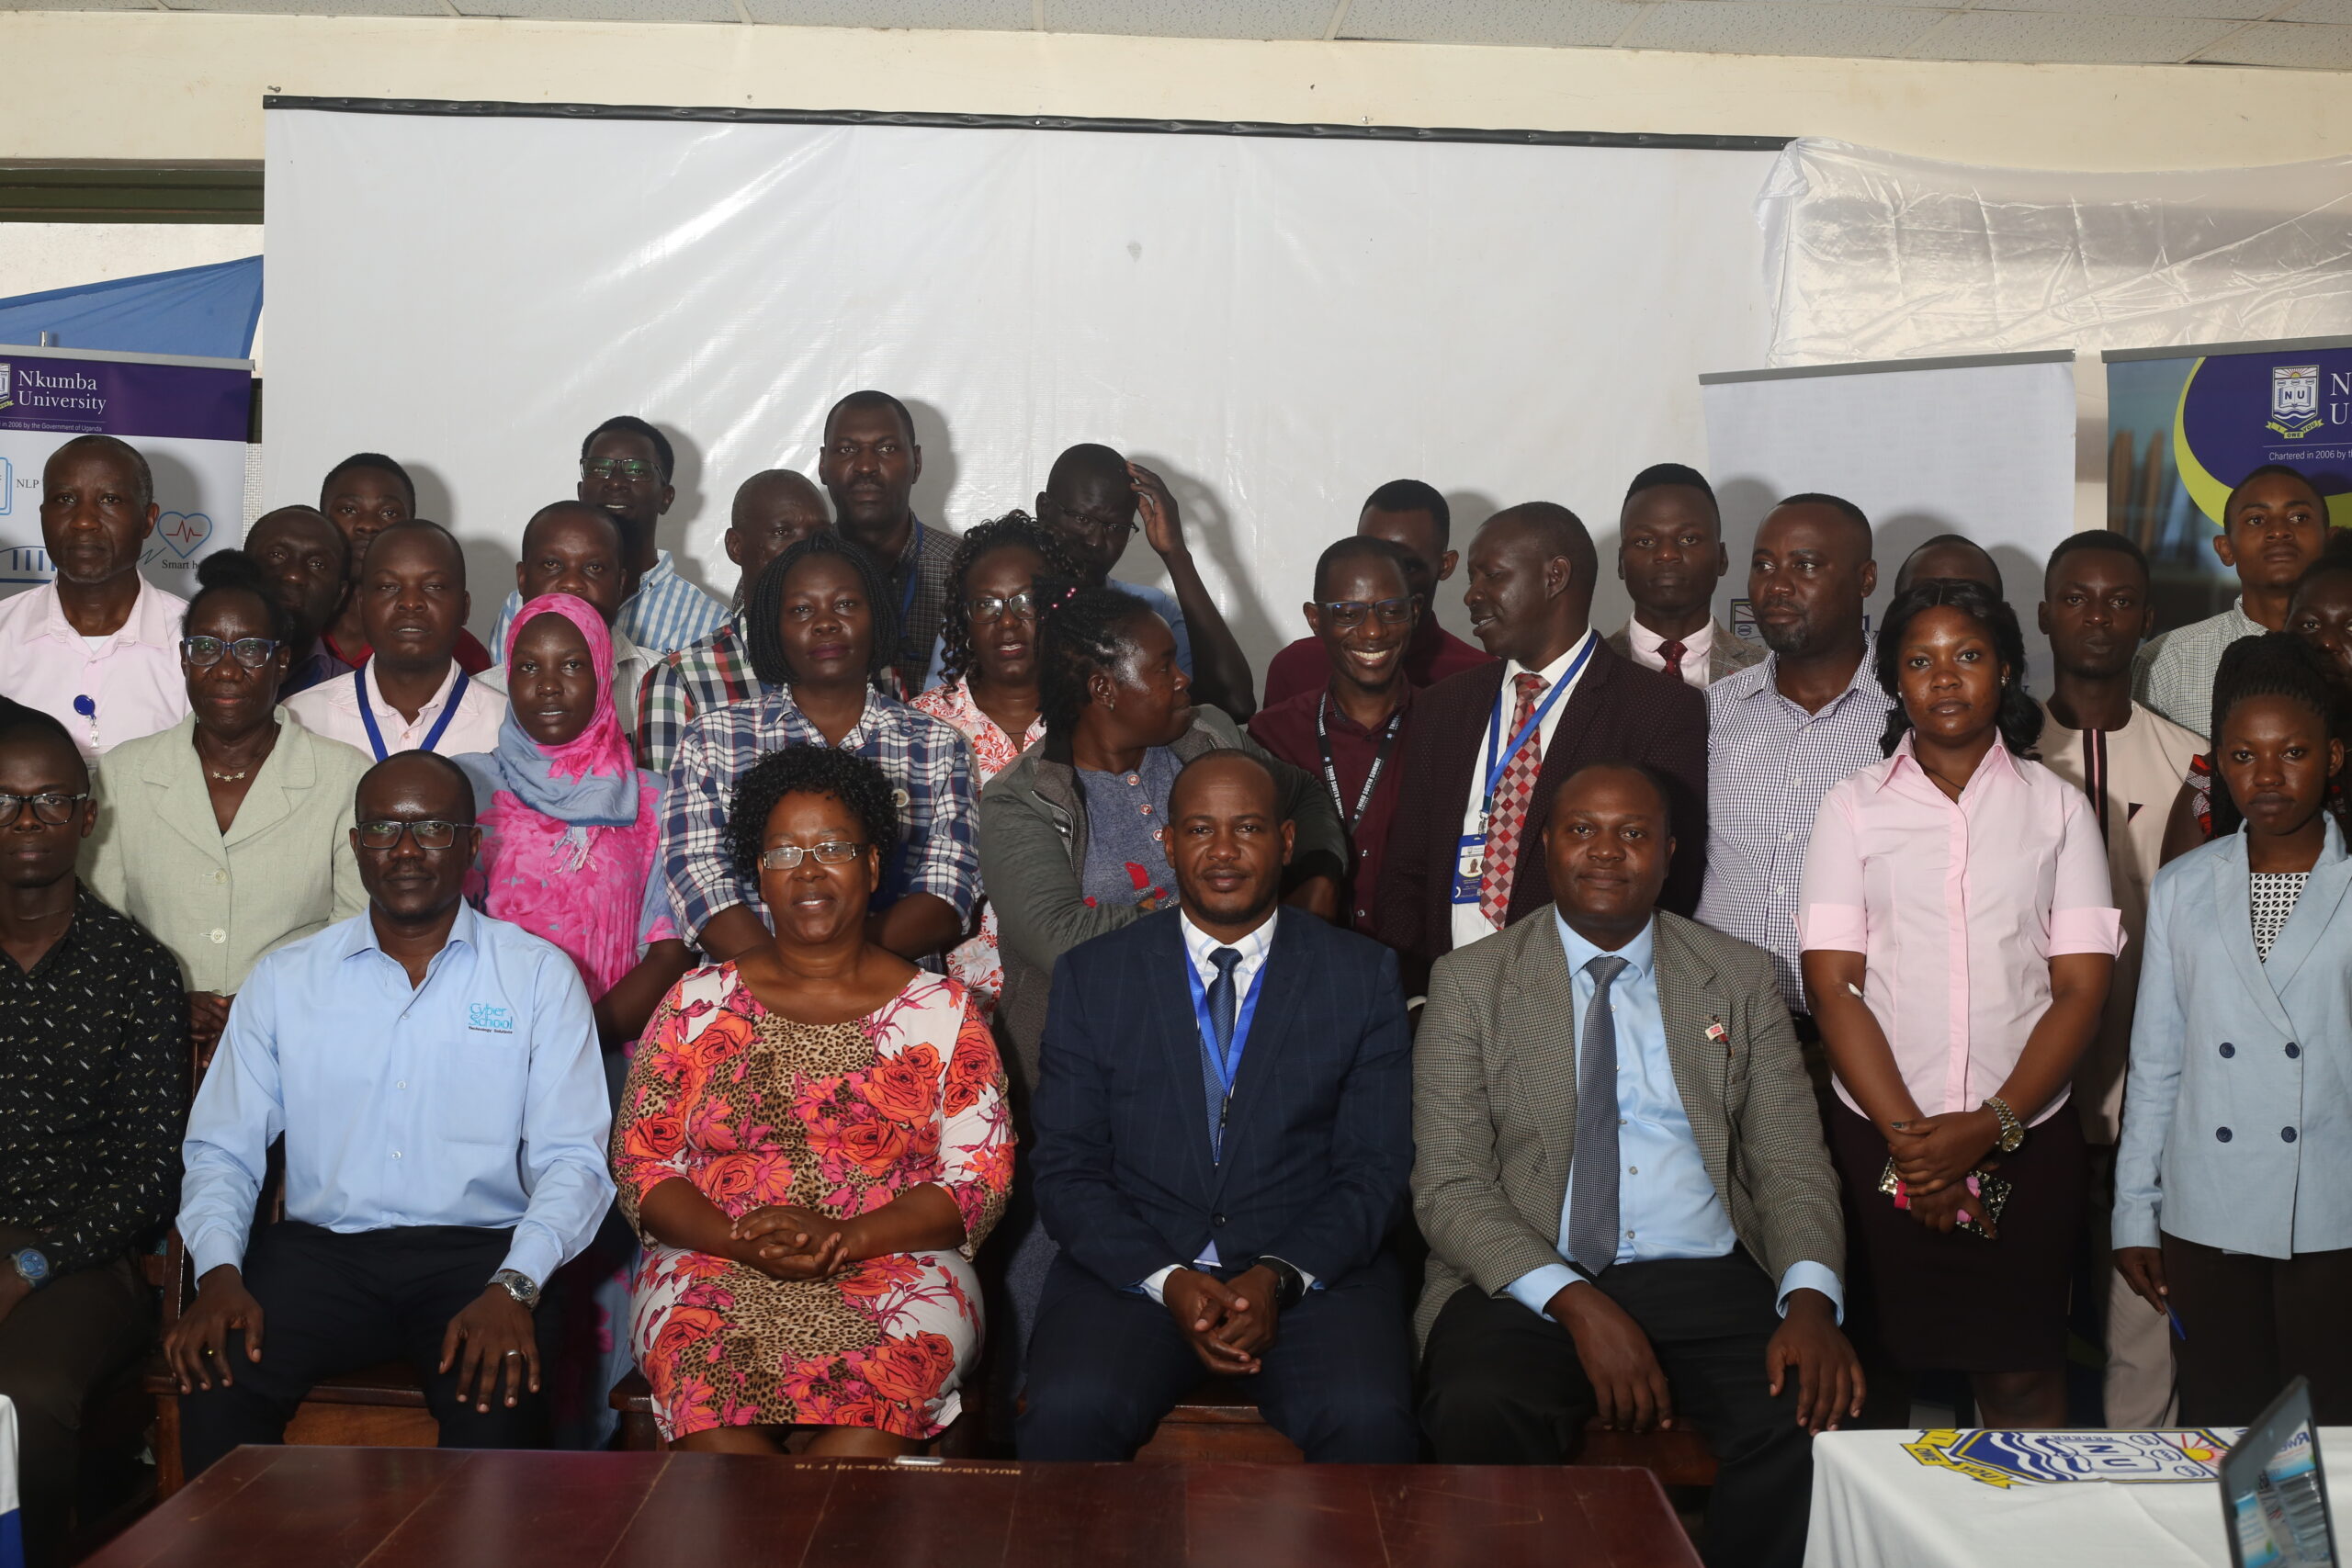 Management, staff and students pause for a photo after the meeting.